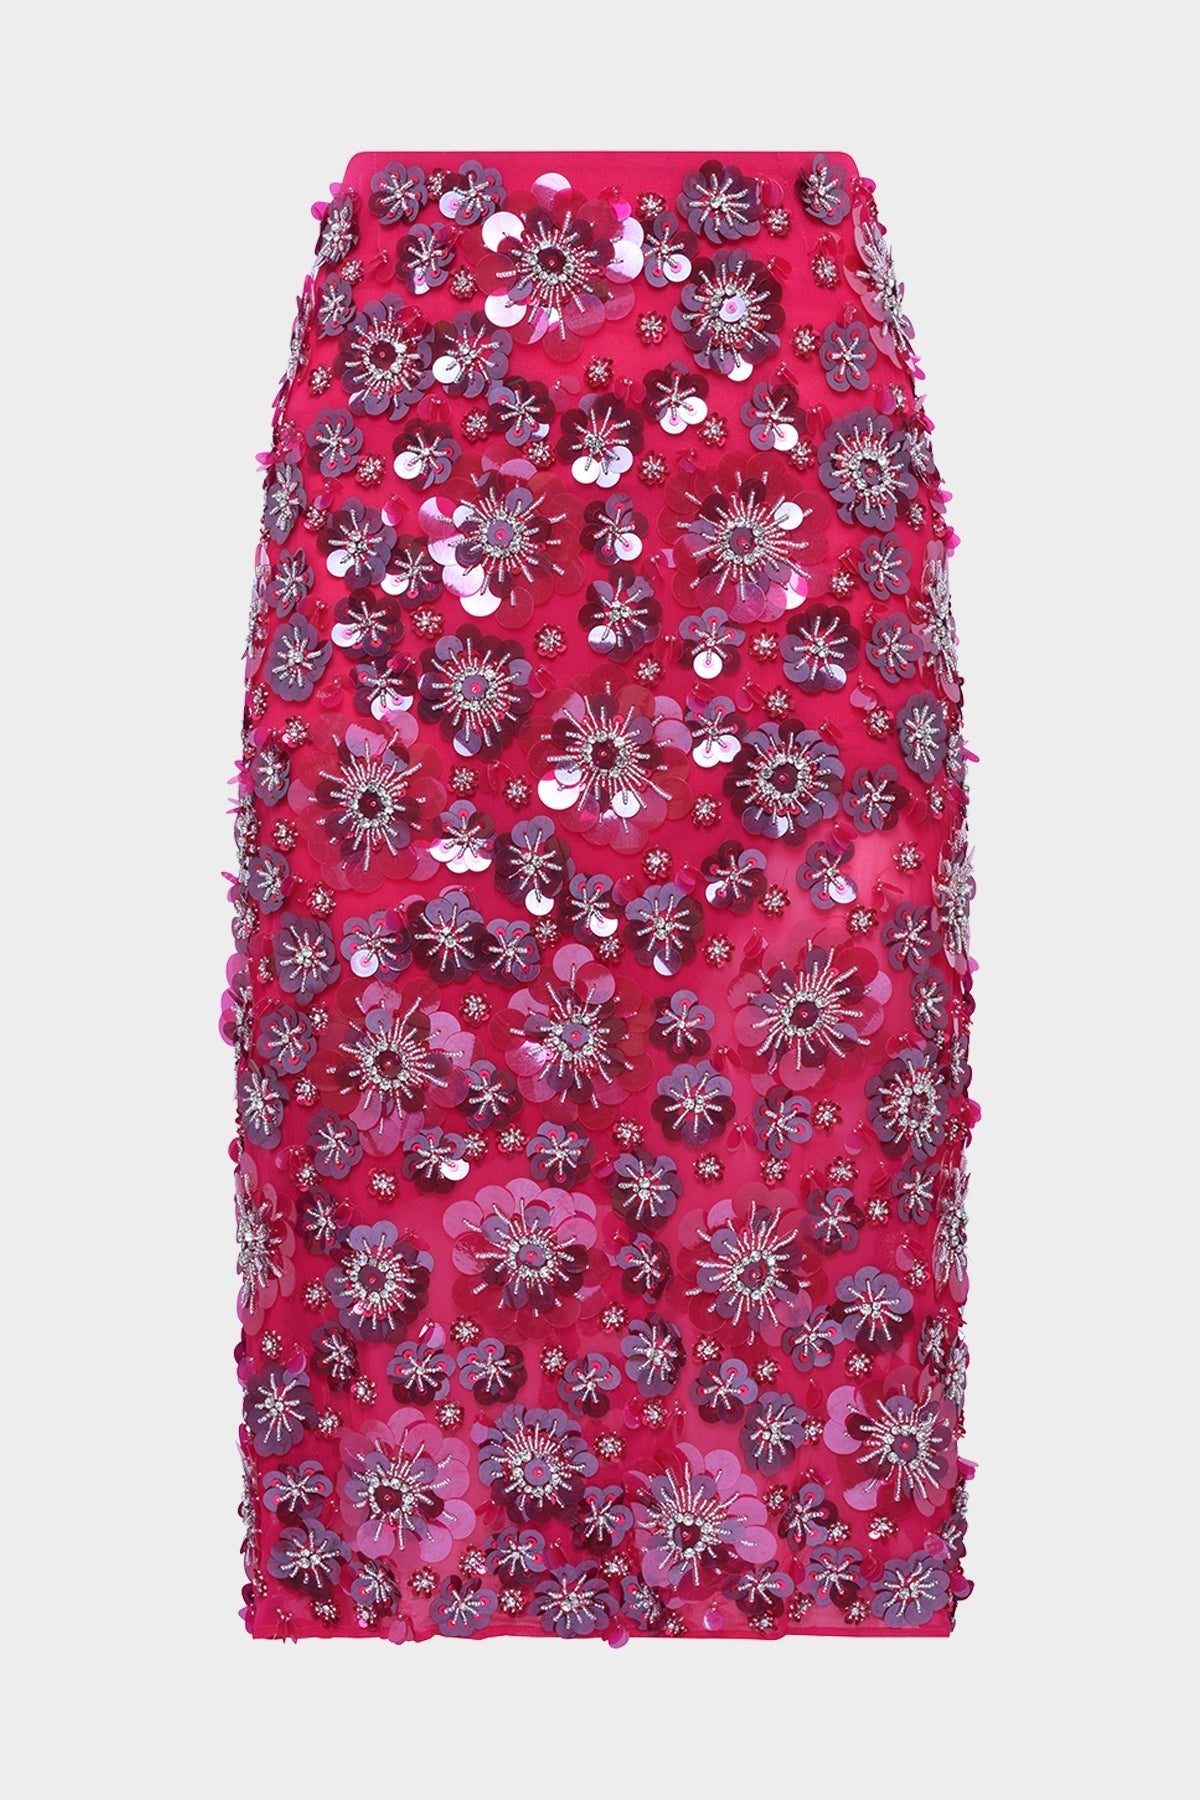 Georgette Fully Embroidered Long Skirt in Magenta - shop-olivia.com